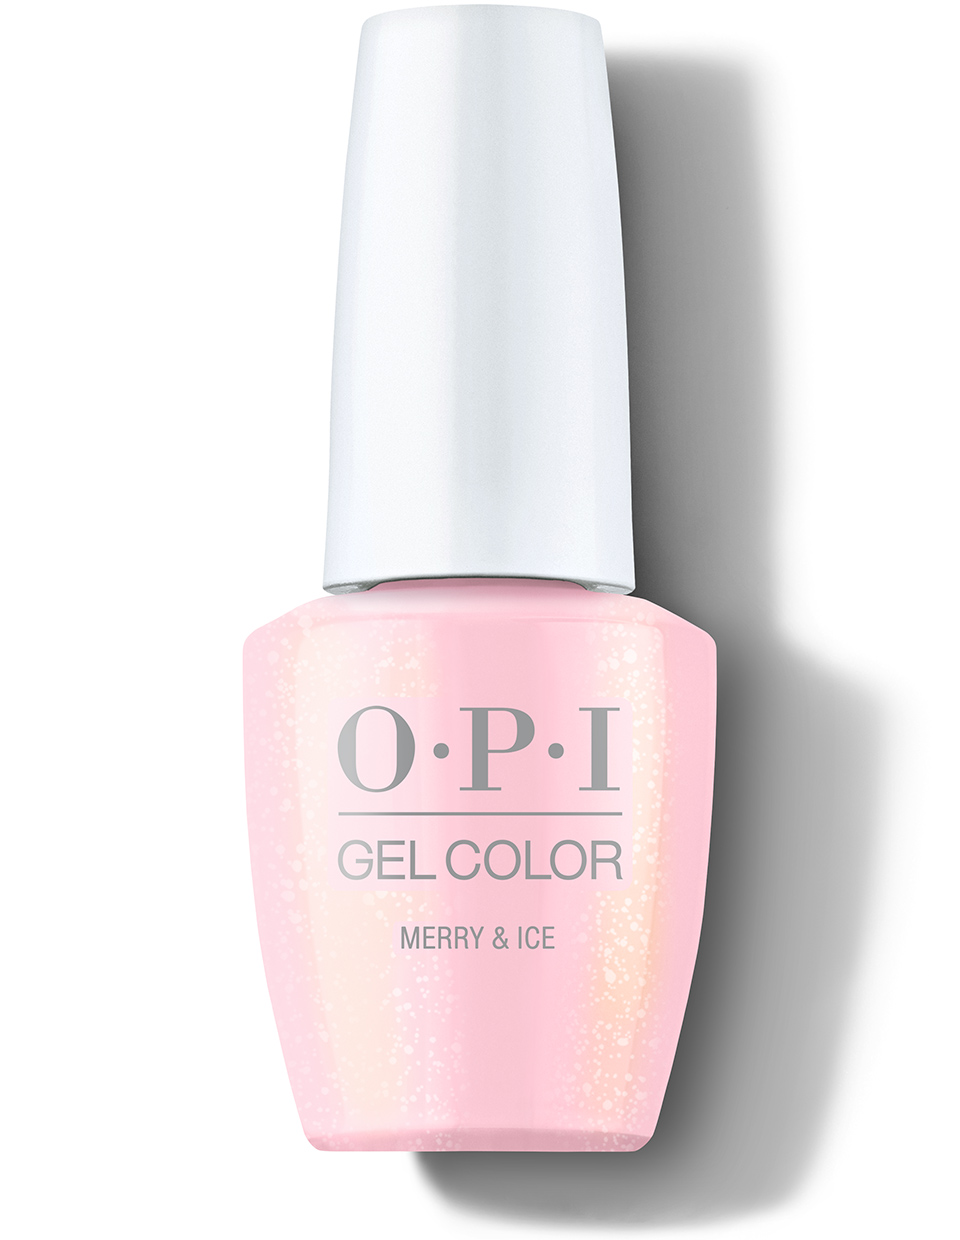 Merry & Ice GelColor Gel Nail Polish | OPI